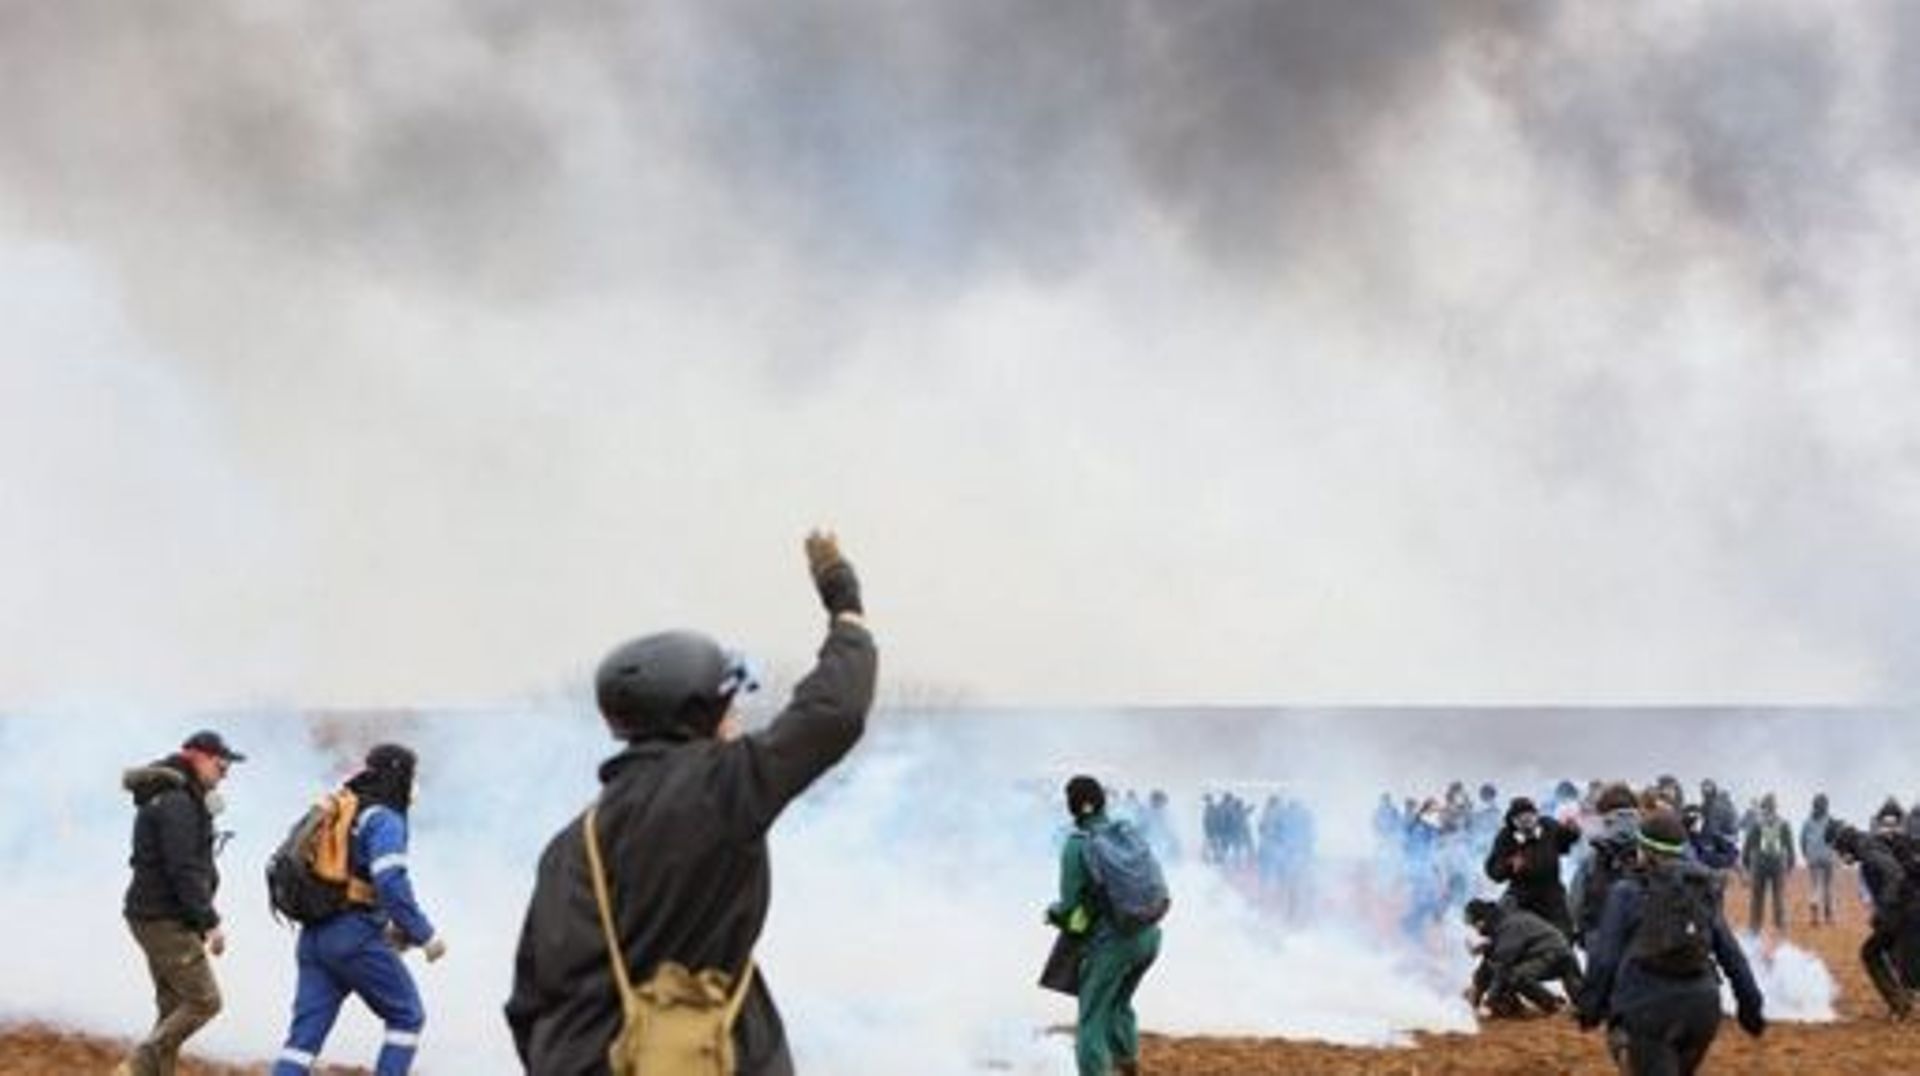 Protesters stand amid tear gas as they clash with riot mobile gendarmes during a demonstration called by the collective "Bassines non merci", the environmental movement "Les Soulevements de la Terre" and the French trade union 'Confederation paysanne' to 